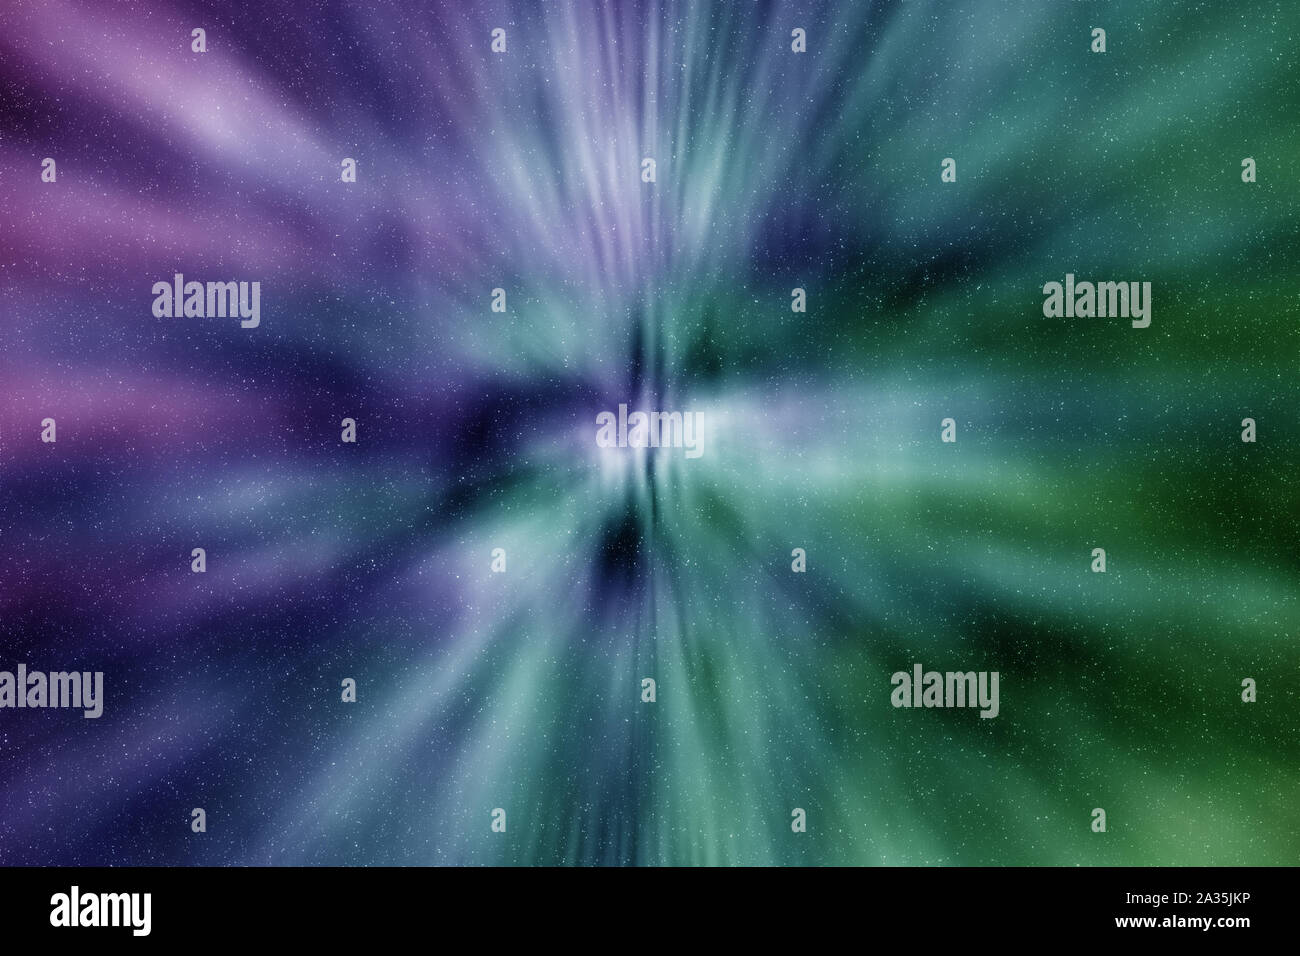 An abstract psychedelic background image. Stock Photo